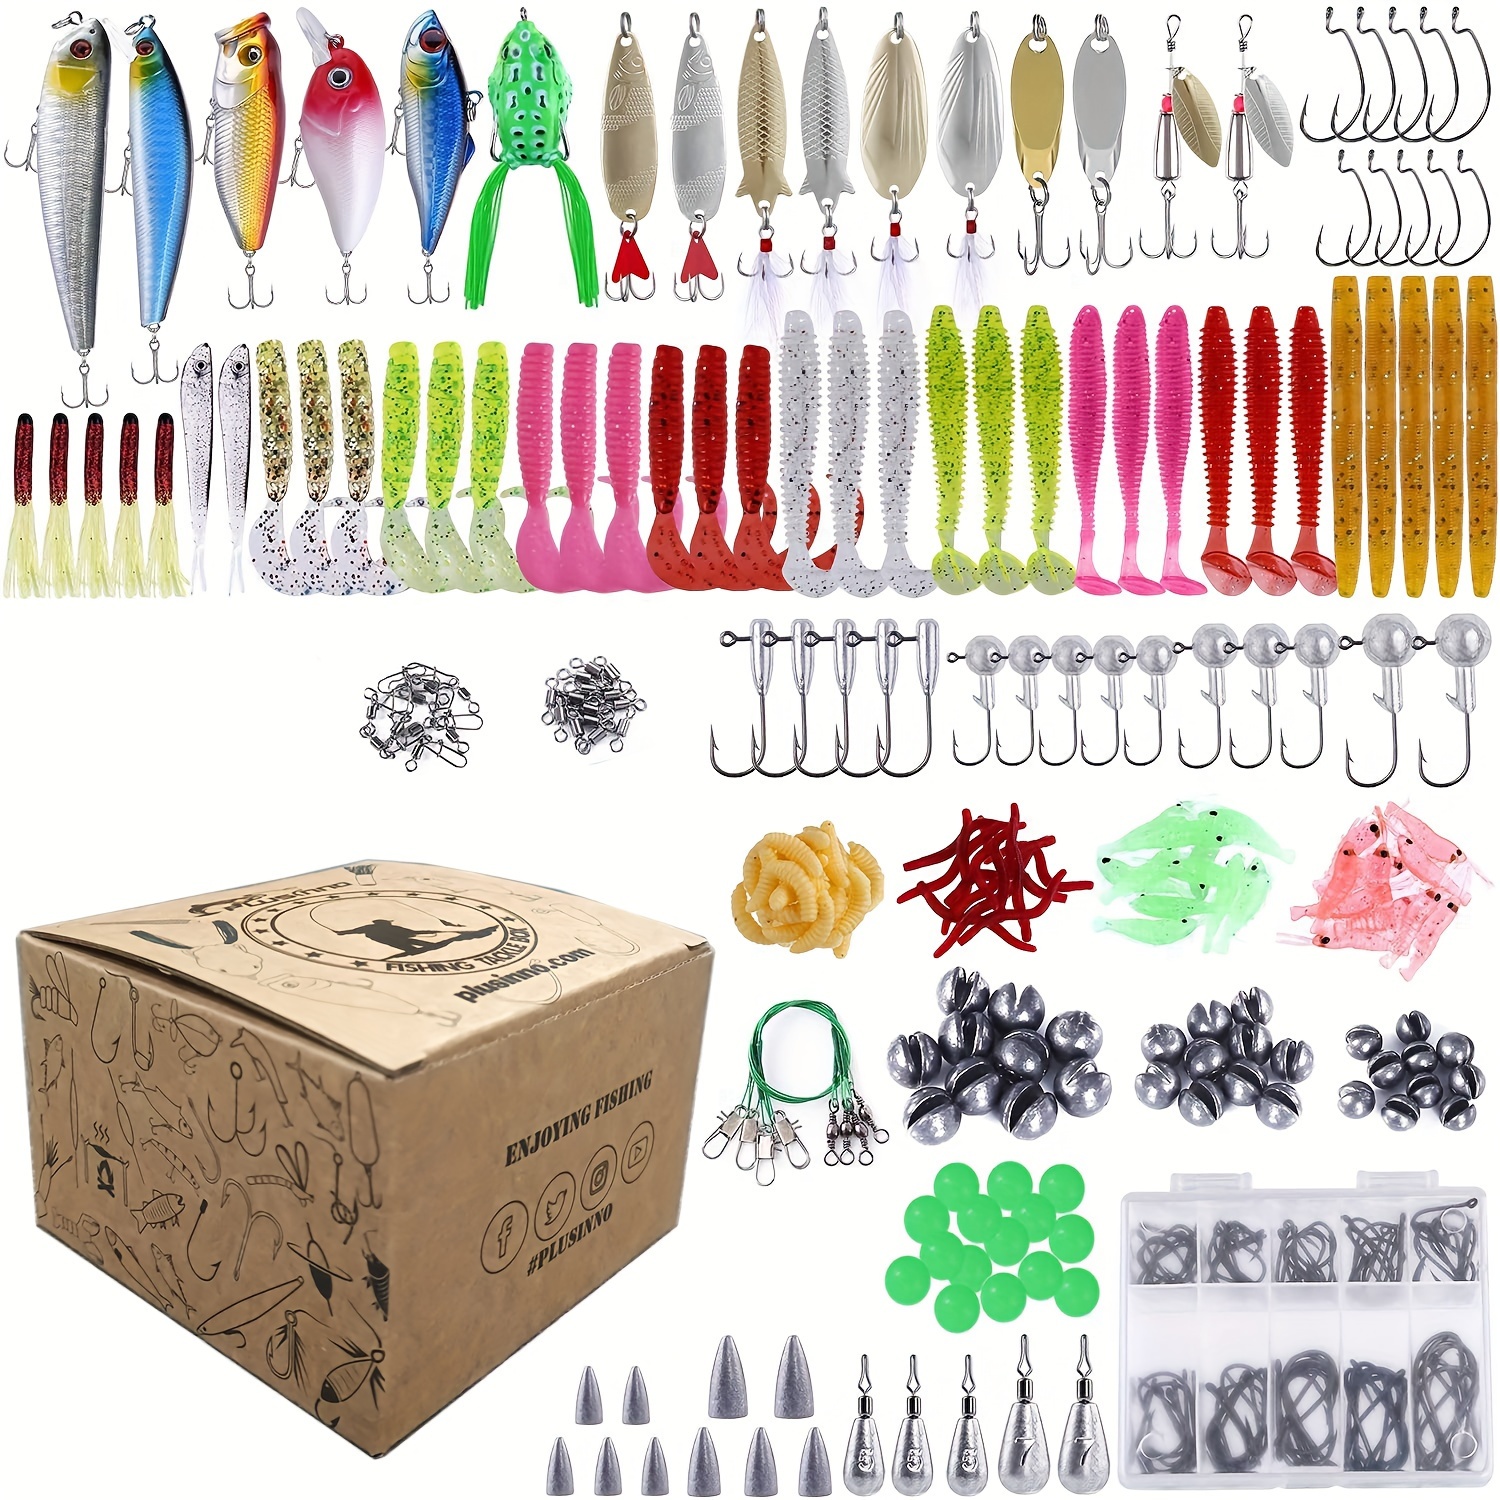 PLUSINNO Fishing Lures Baits Tackle Including Crankbaits, Spinnerbaits, Plastic  Worms, Jigs, Topwater Lures, Tackle Box and More Fishing Gear Lures Kit Set,  210/189Pcs Fishing Lure Tackle 210PCS Fishing Lure